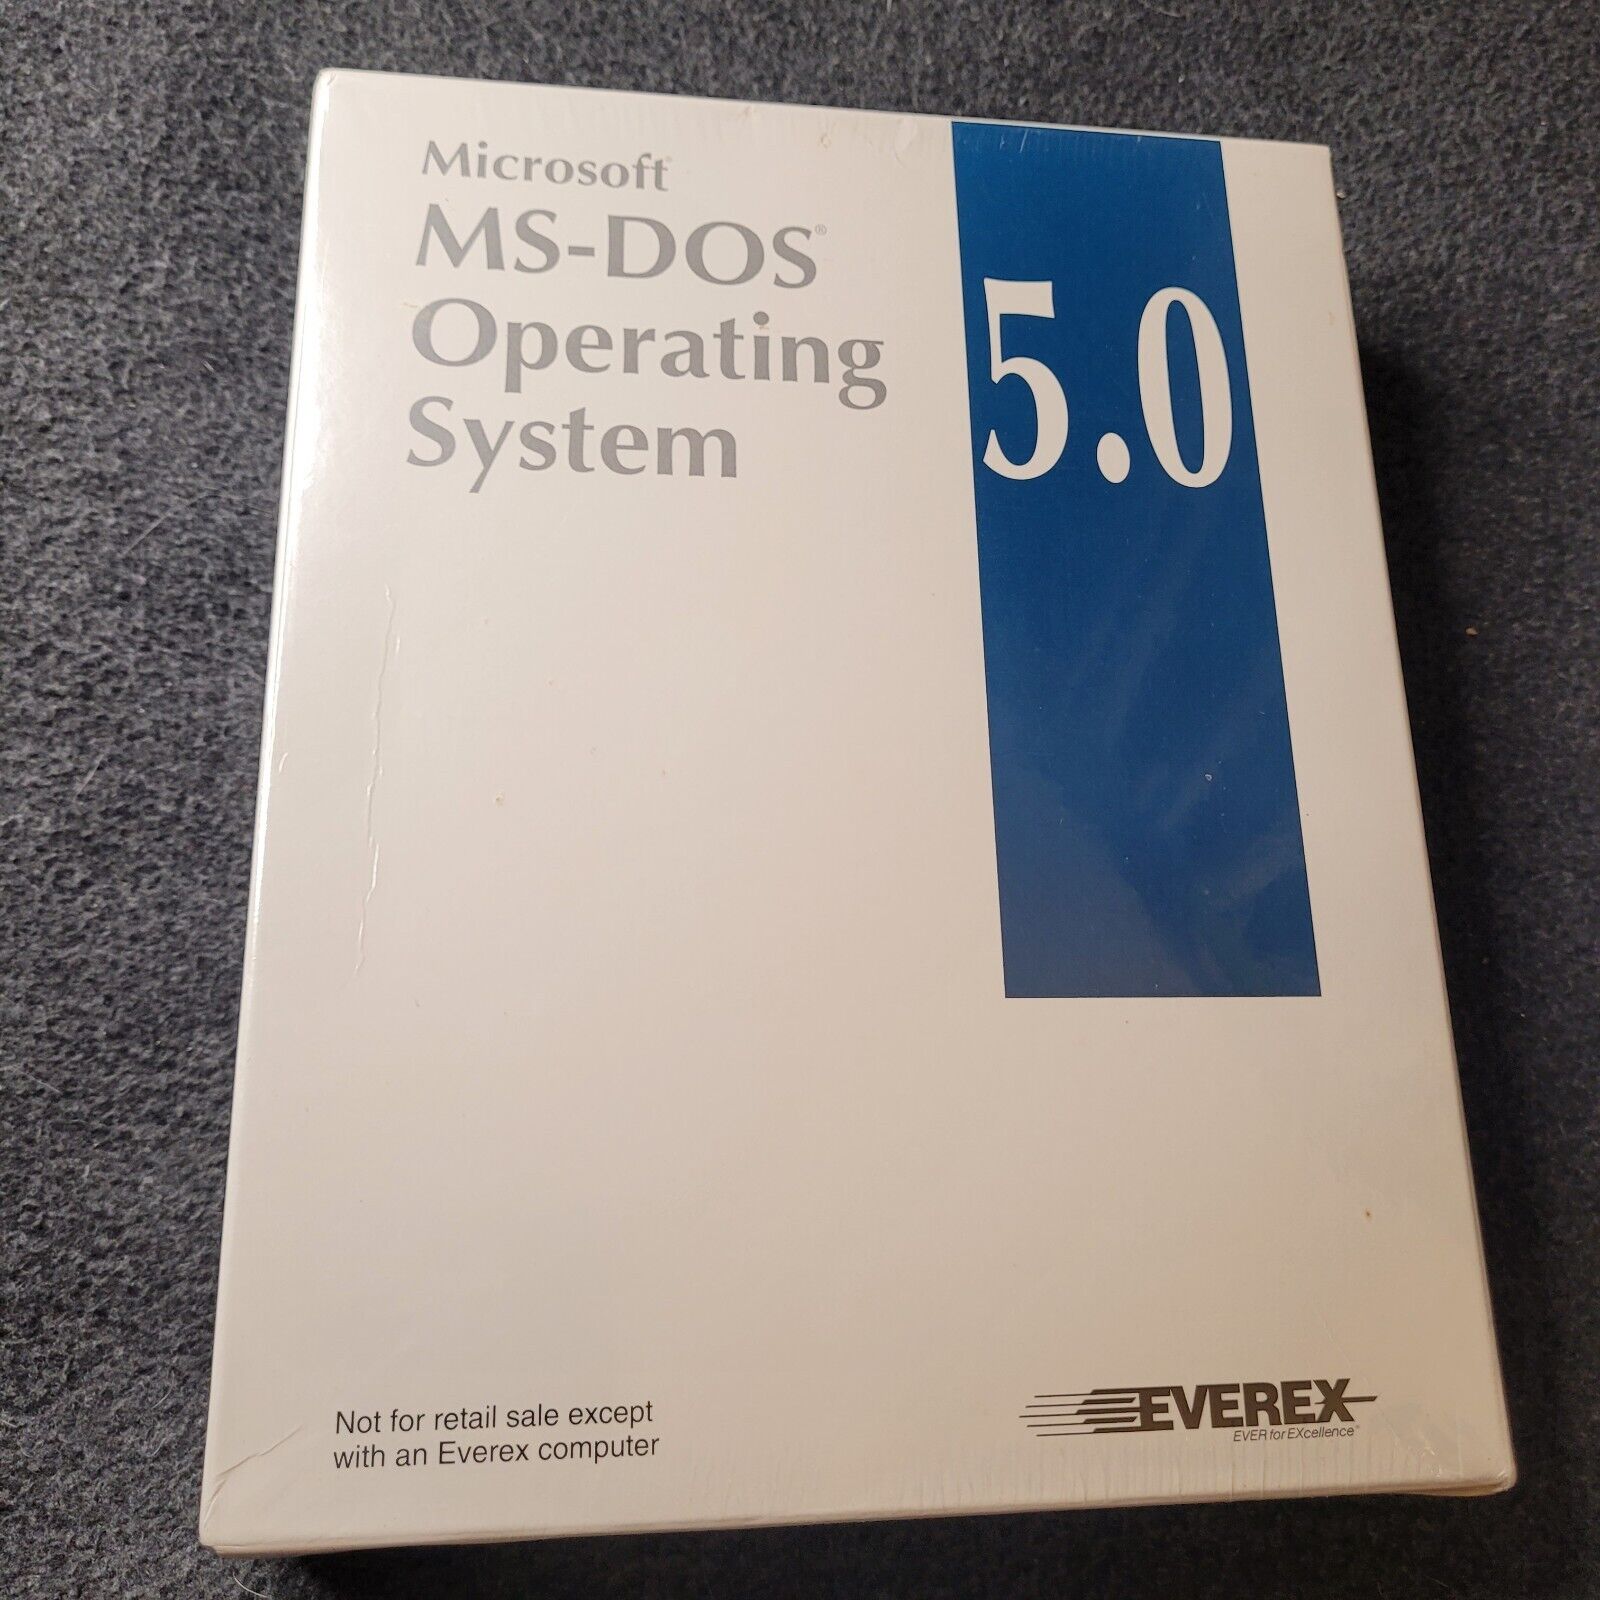 MS-DOS 5.0 Operating System Factory Sealed Includes Manuals Floppy Discs USA